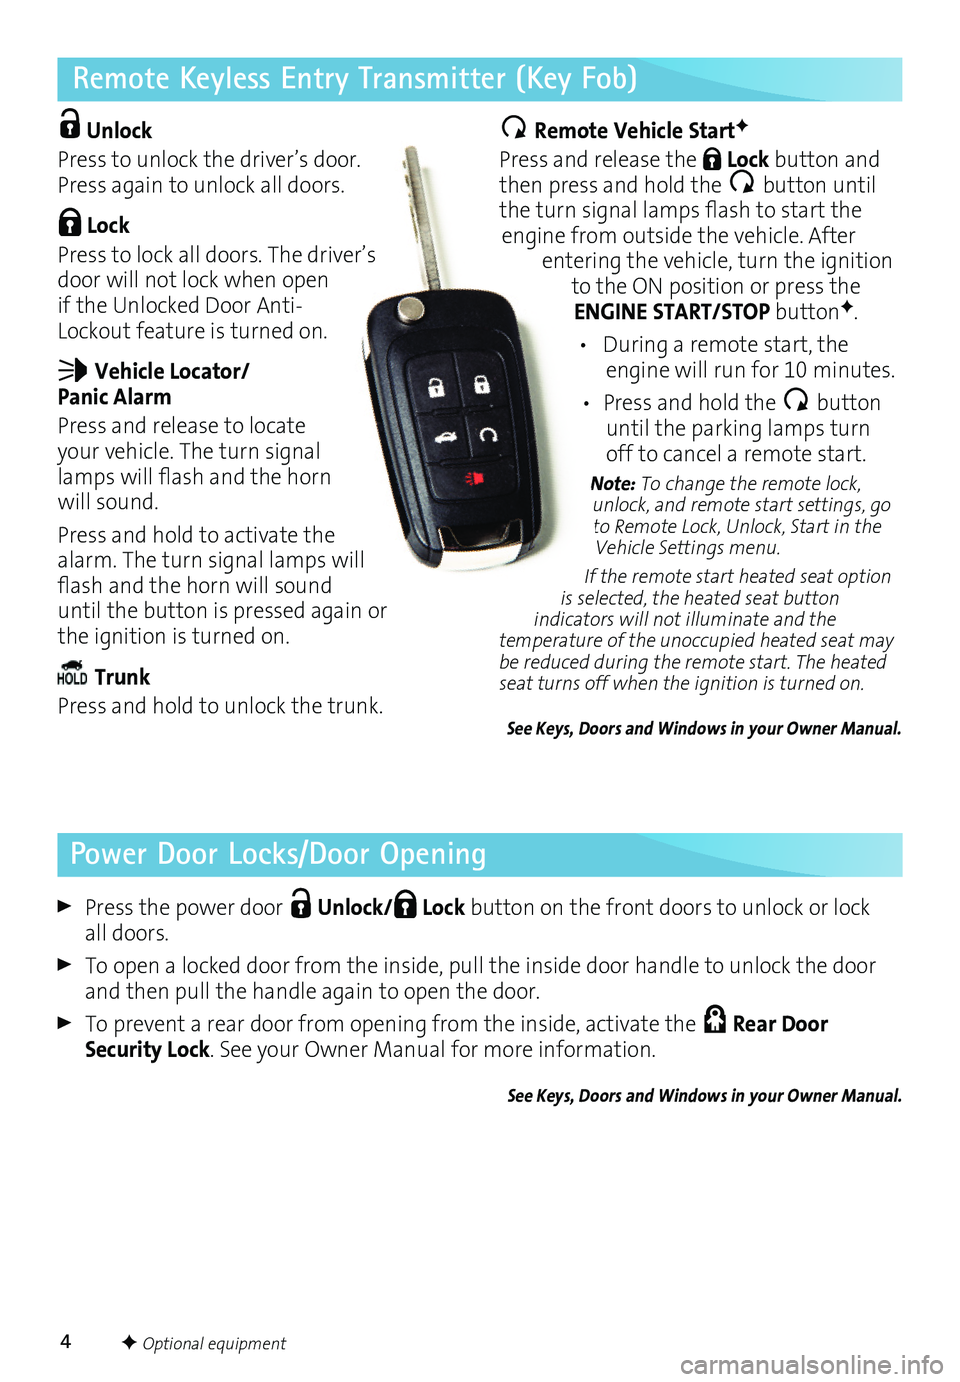 BUICK REGAL 2016  Get To Know Guide 4
Remote Keyless Entry Transmitter (Key Fob) 
 Unlock 
Press to unlock the driver’s door. Press again to unlock all doors.
 Lock 
Press to lock all doors. The driver’s door will not lock when open